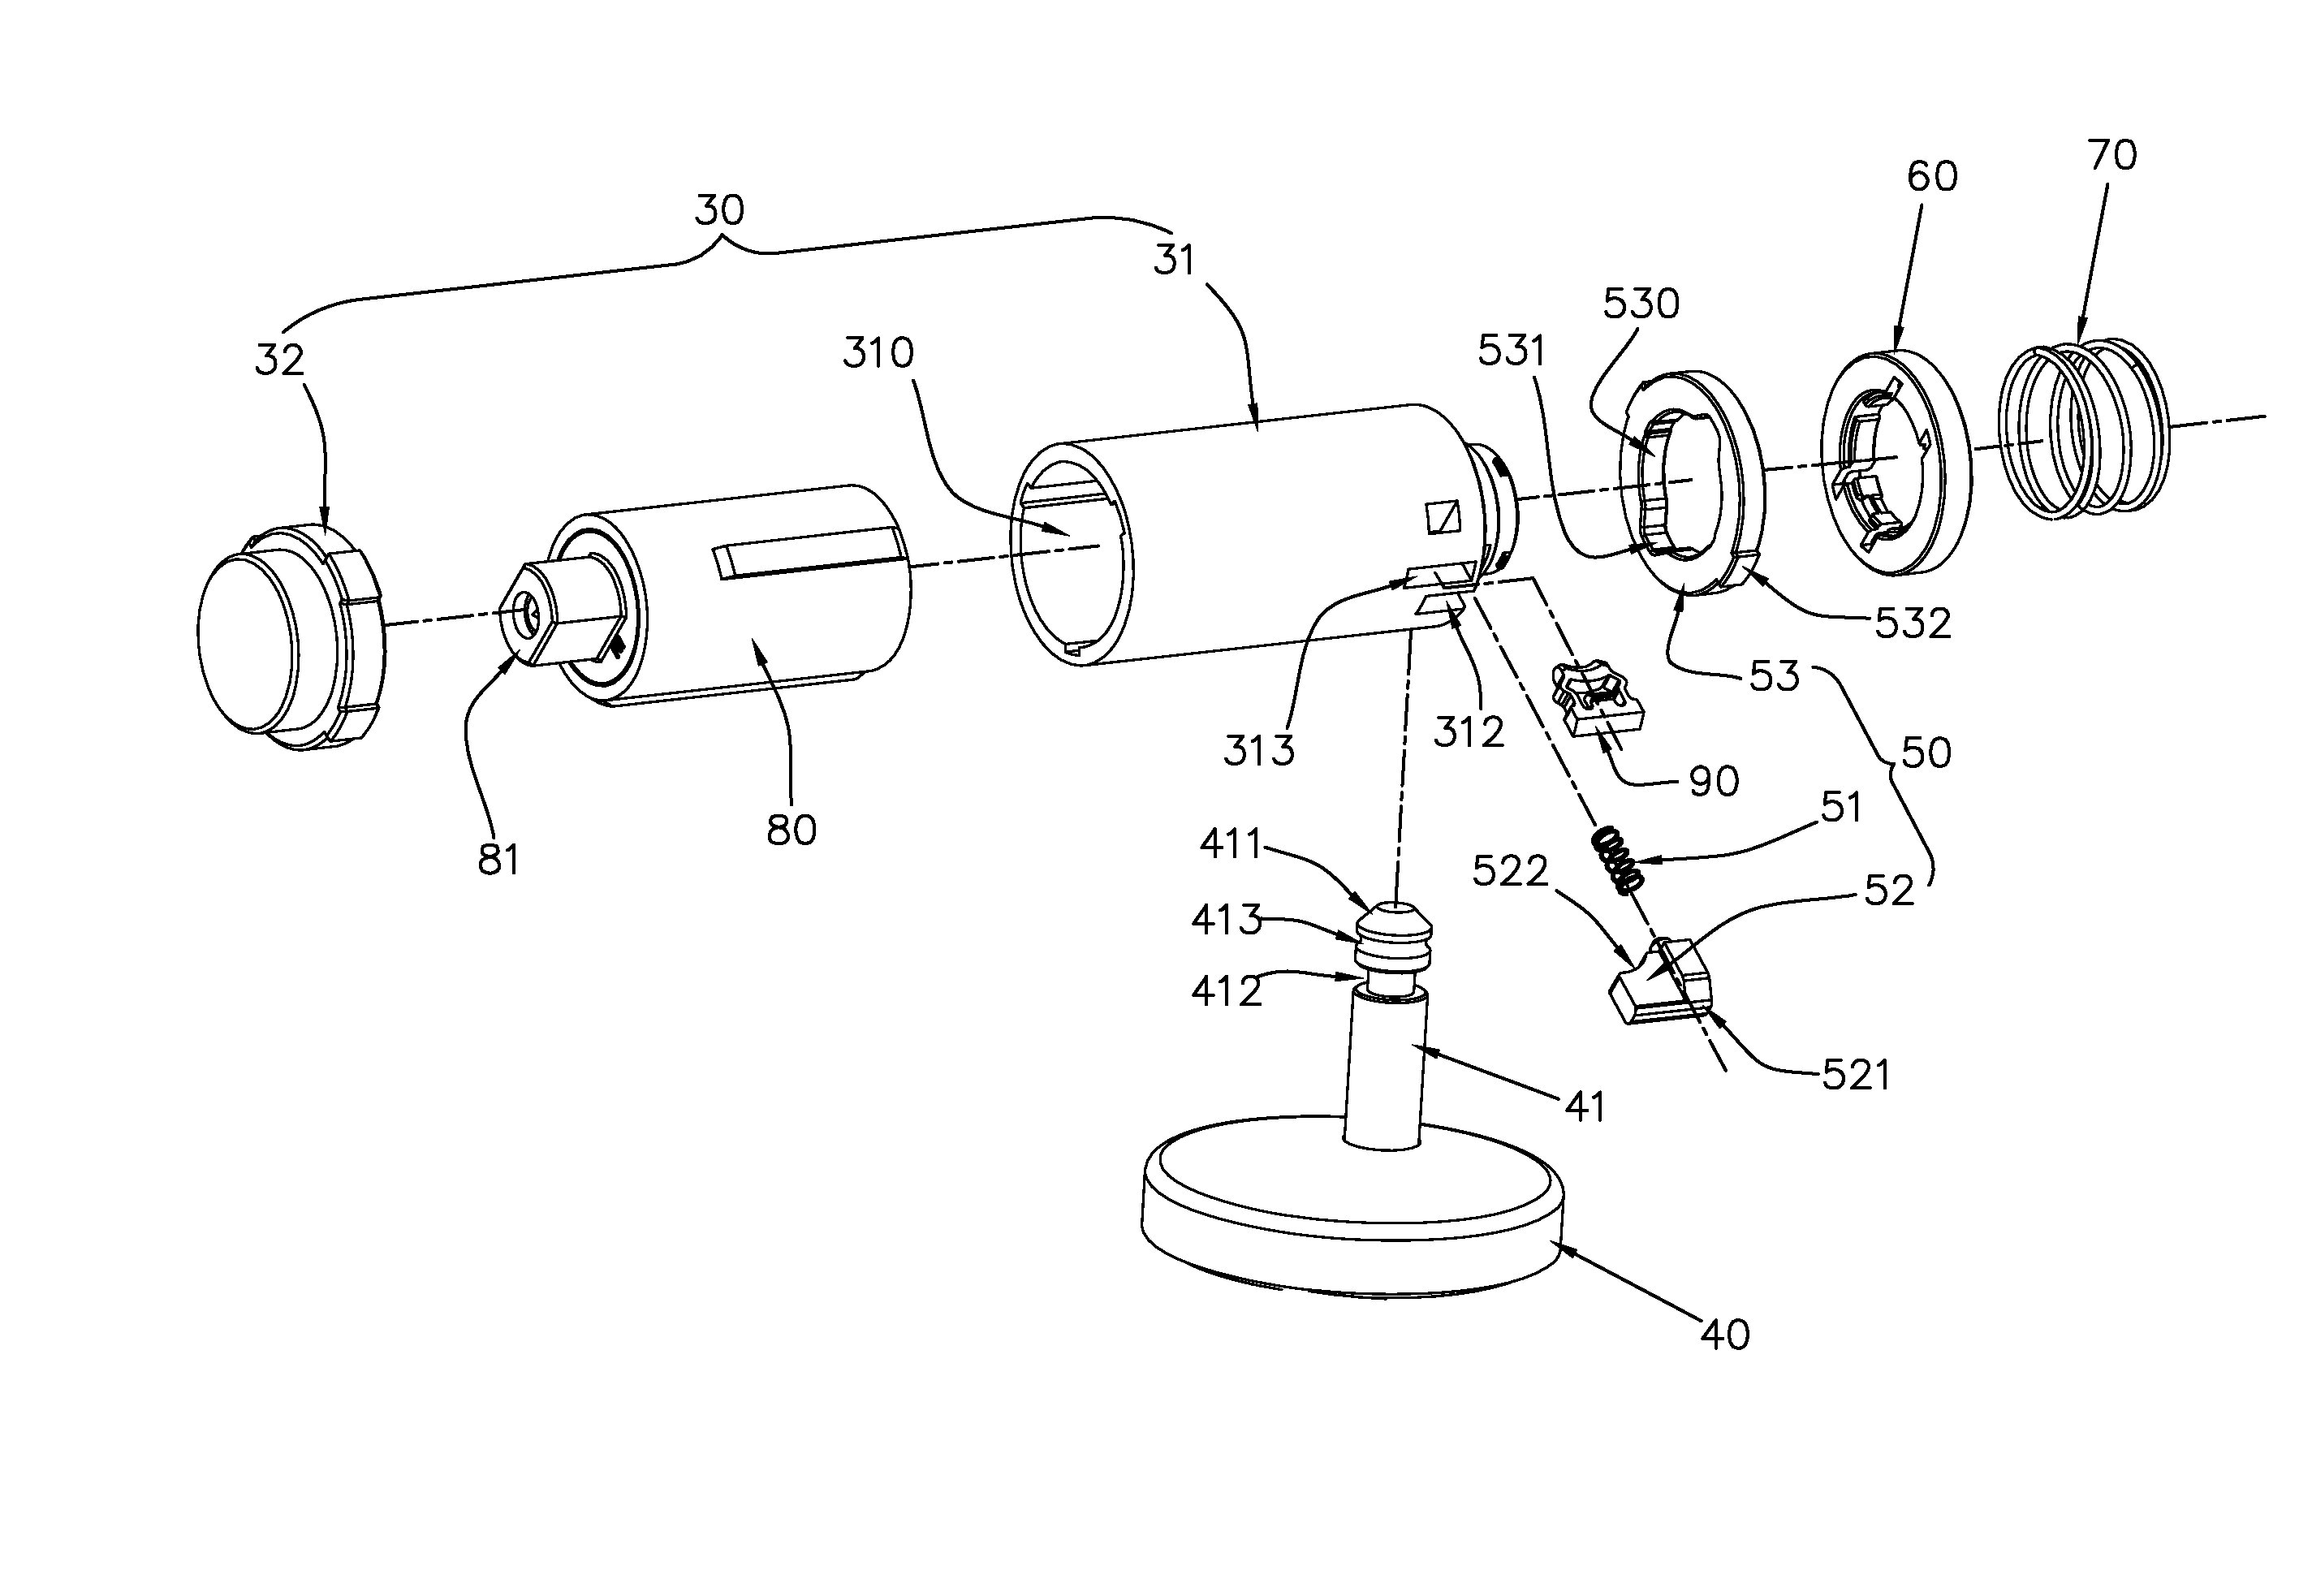 Vertical assembling and disassembling mechanism for toilet seat